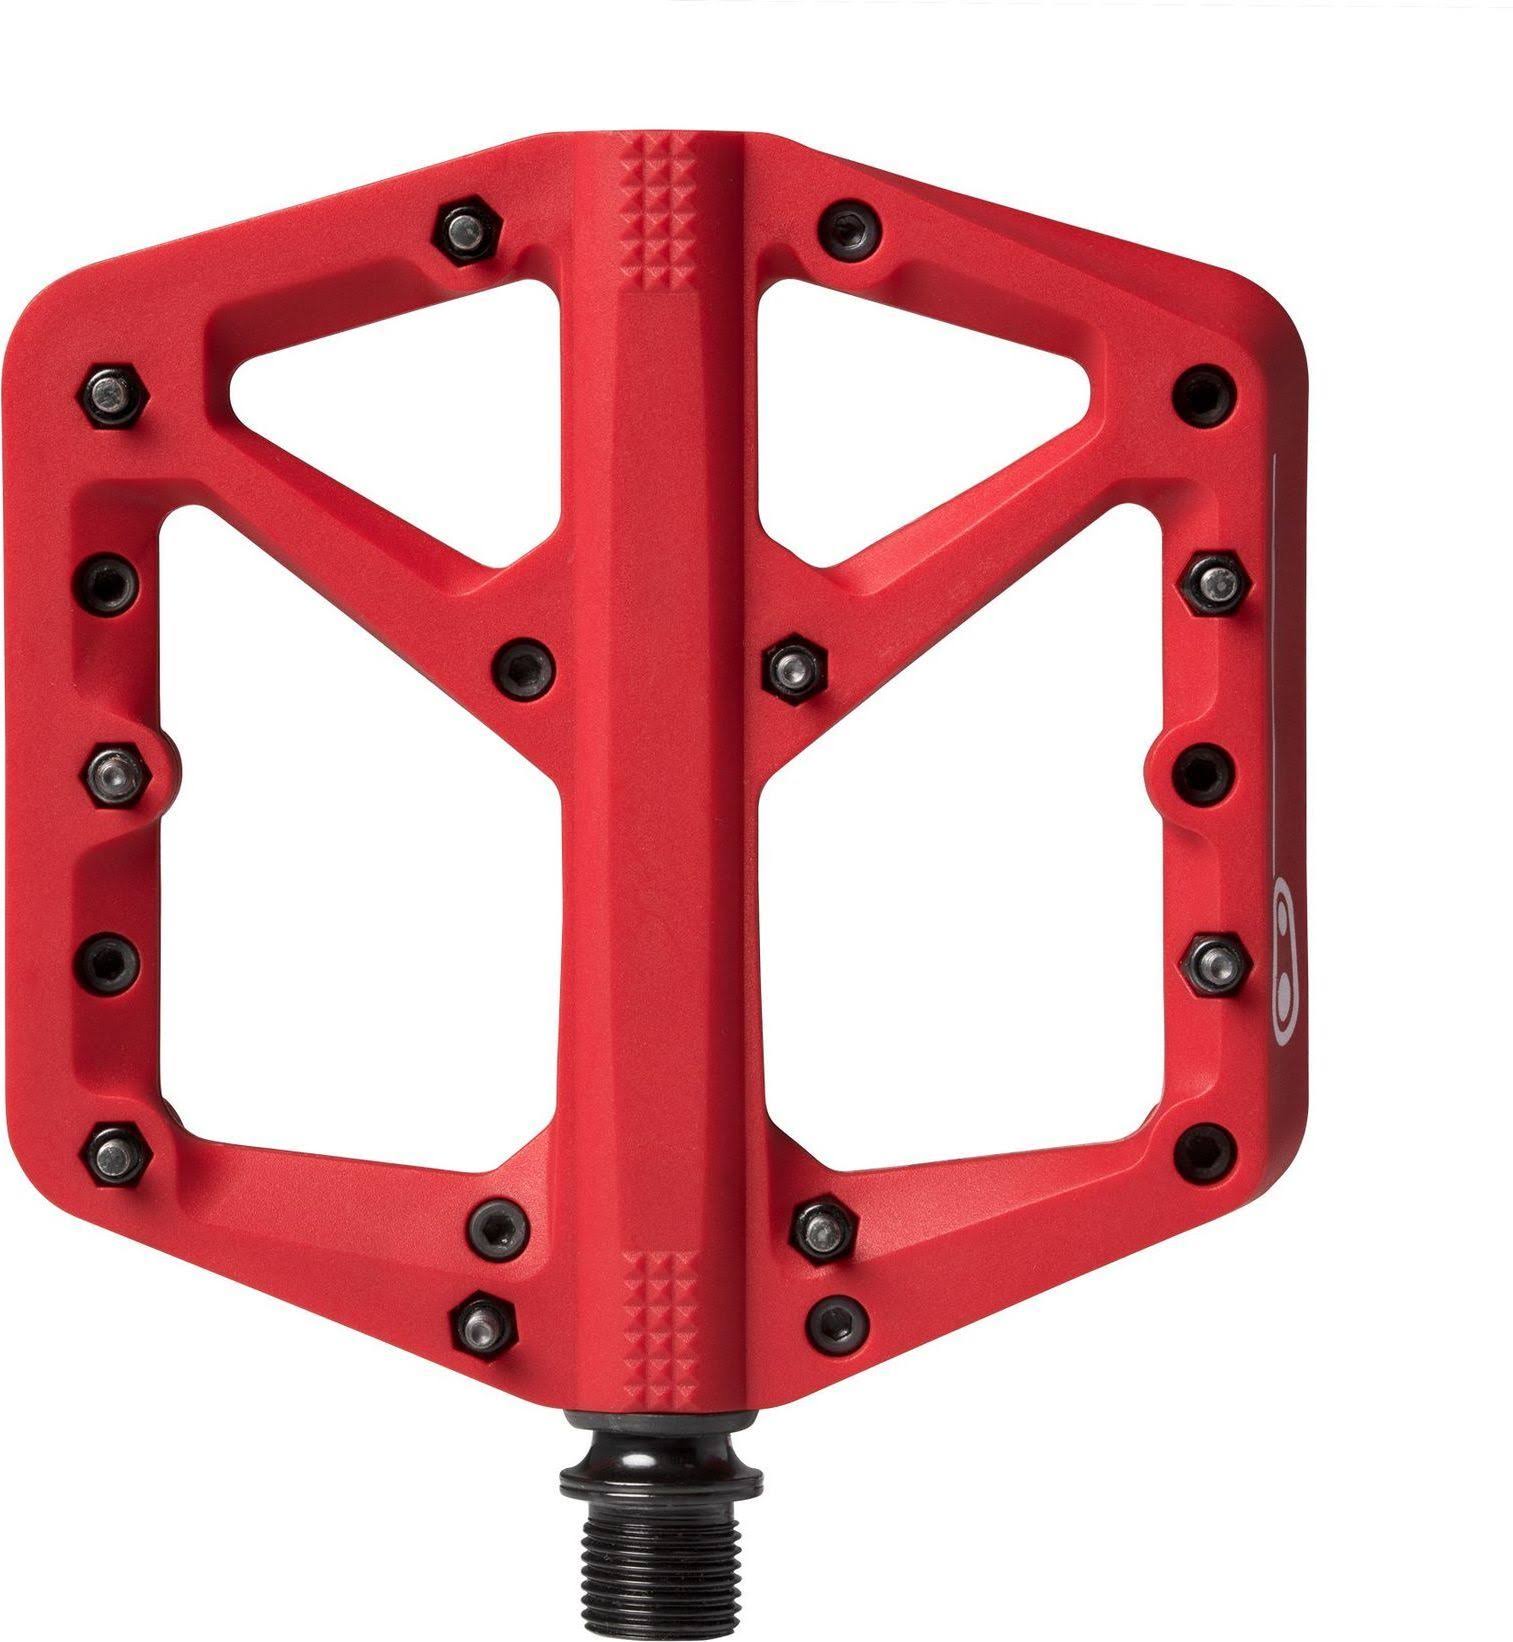 Crank Brothers Crankbrothers Unisex's Stamp 1 Bike Pedals - Red